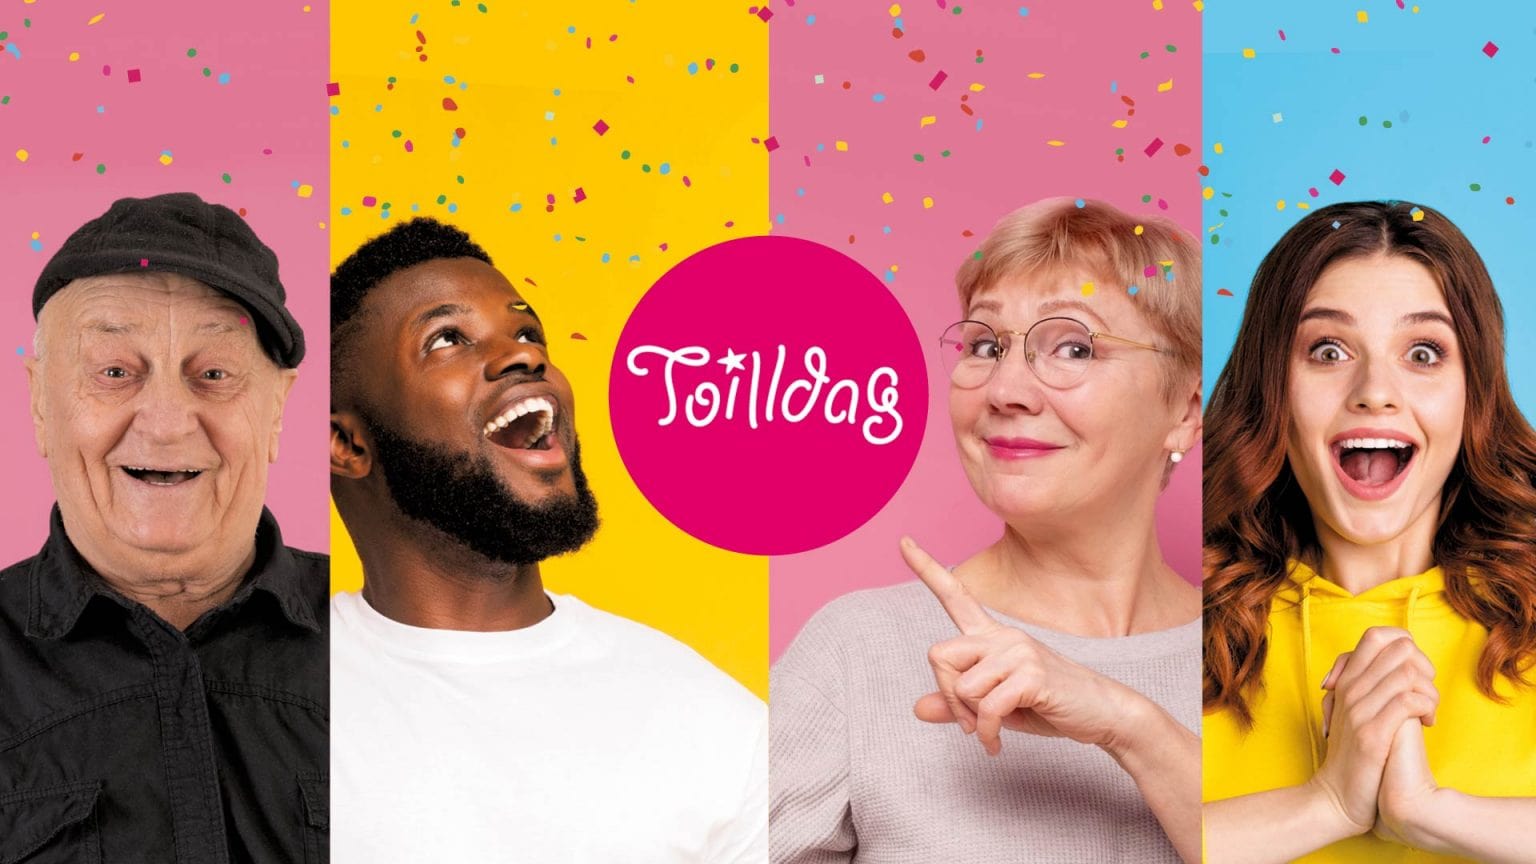 Featured image for “Toilldag”